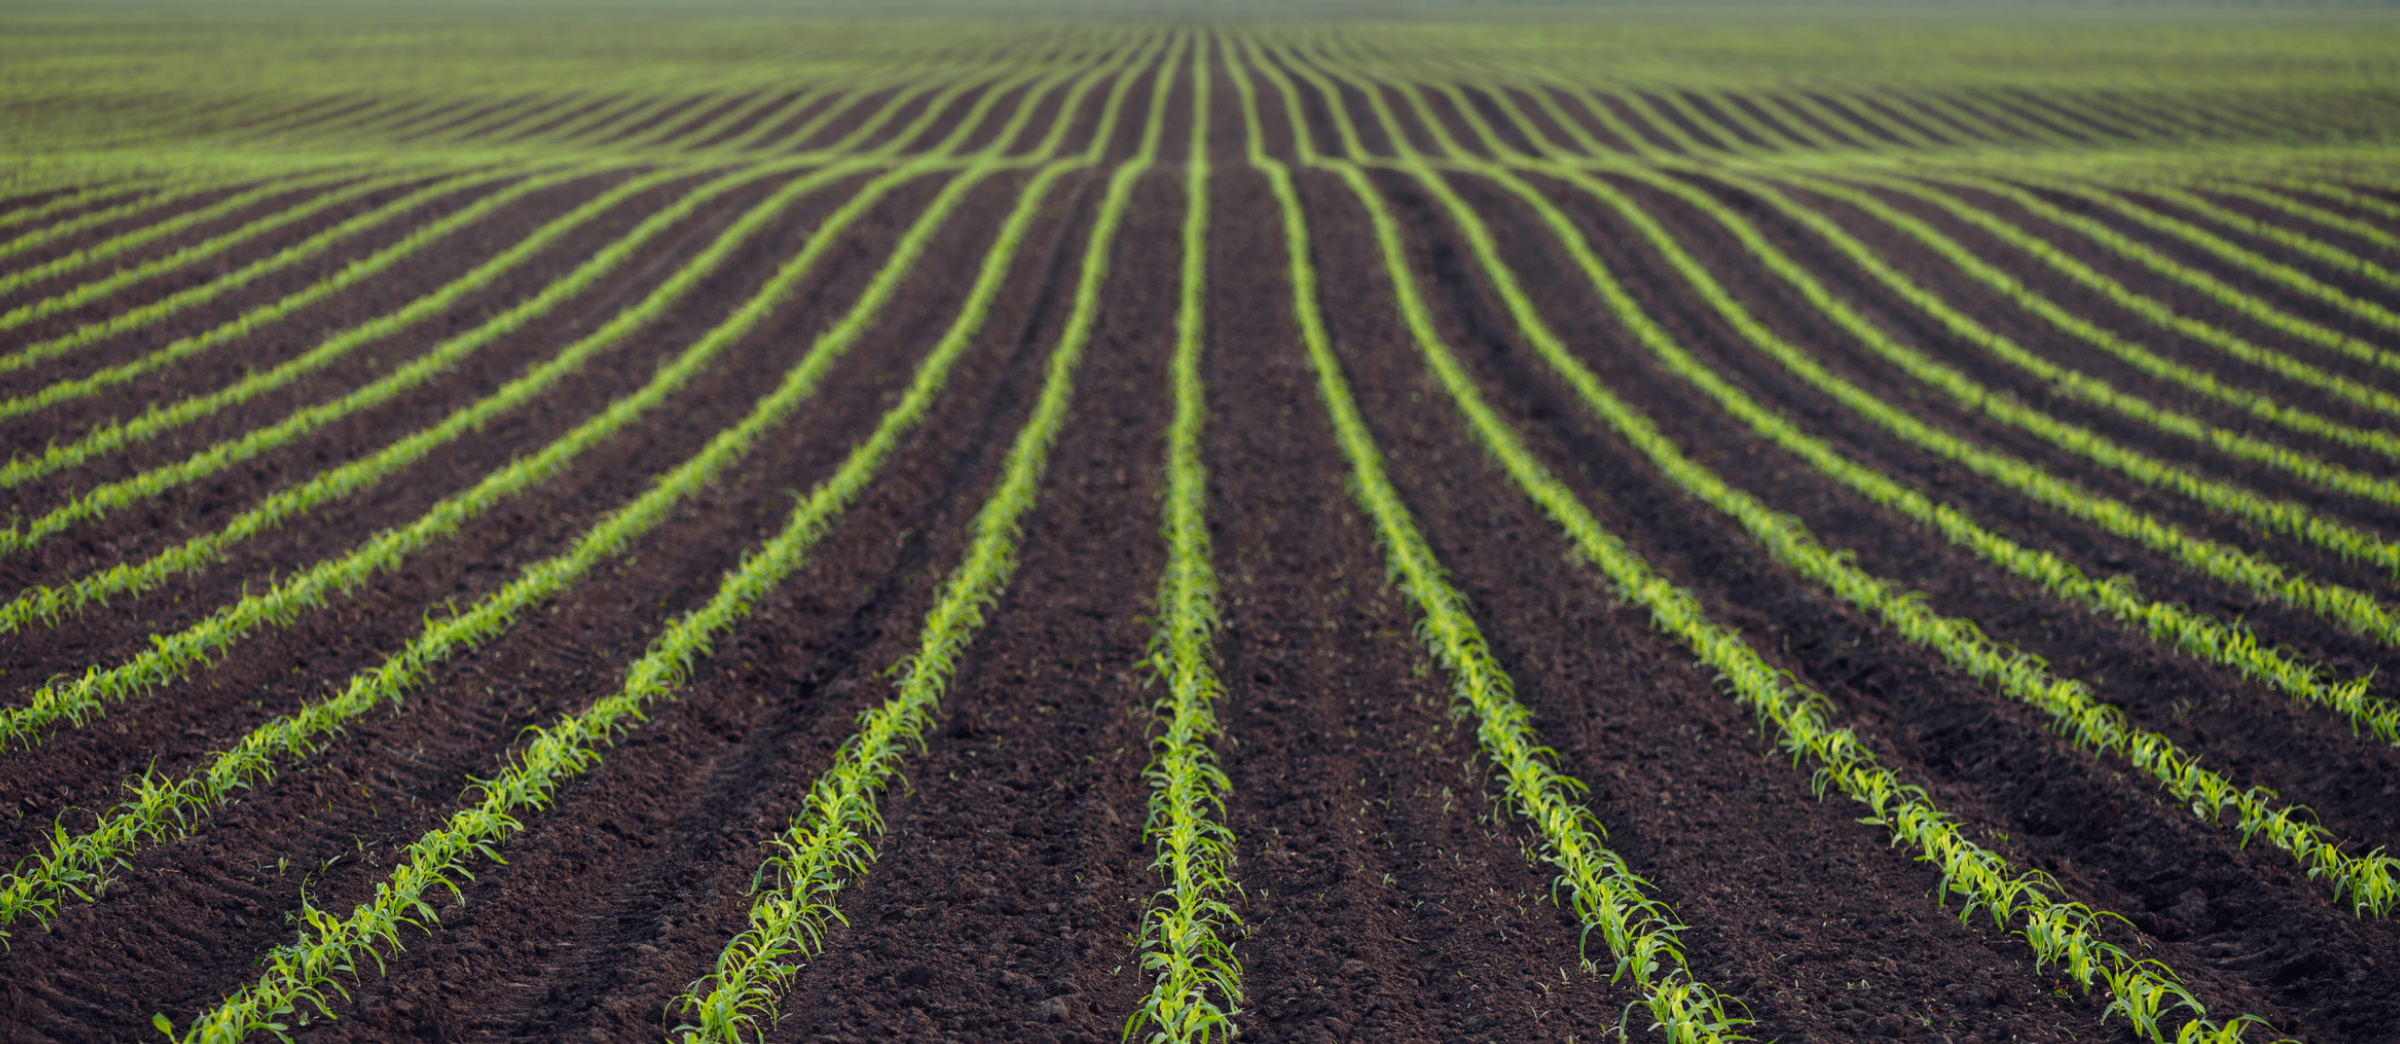 large picture view of field of young corn plants